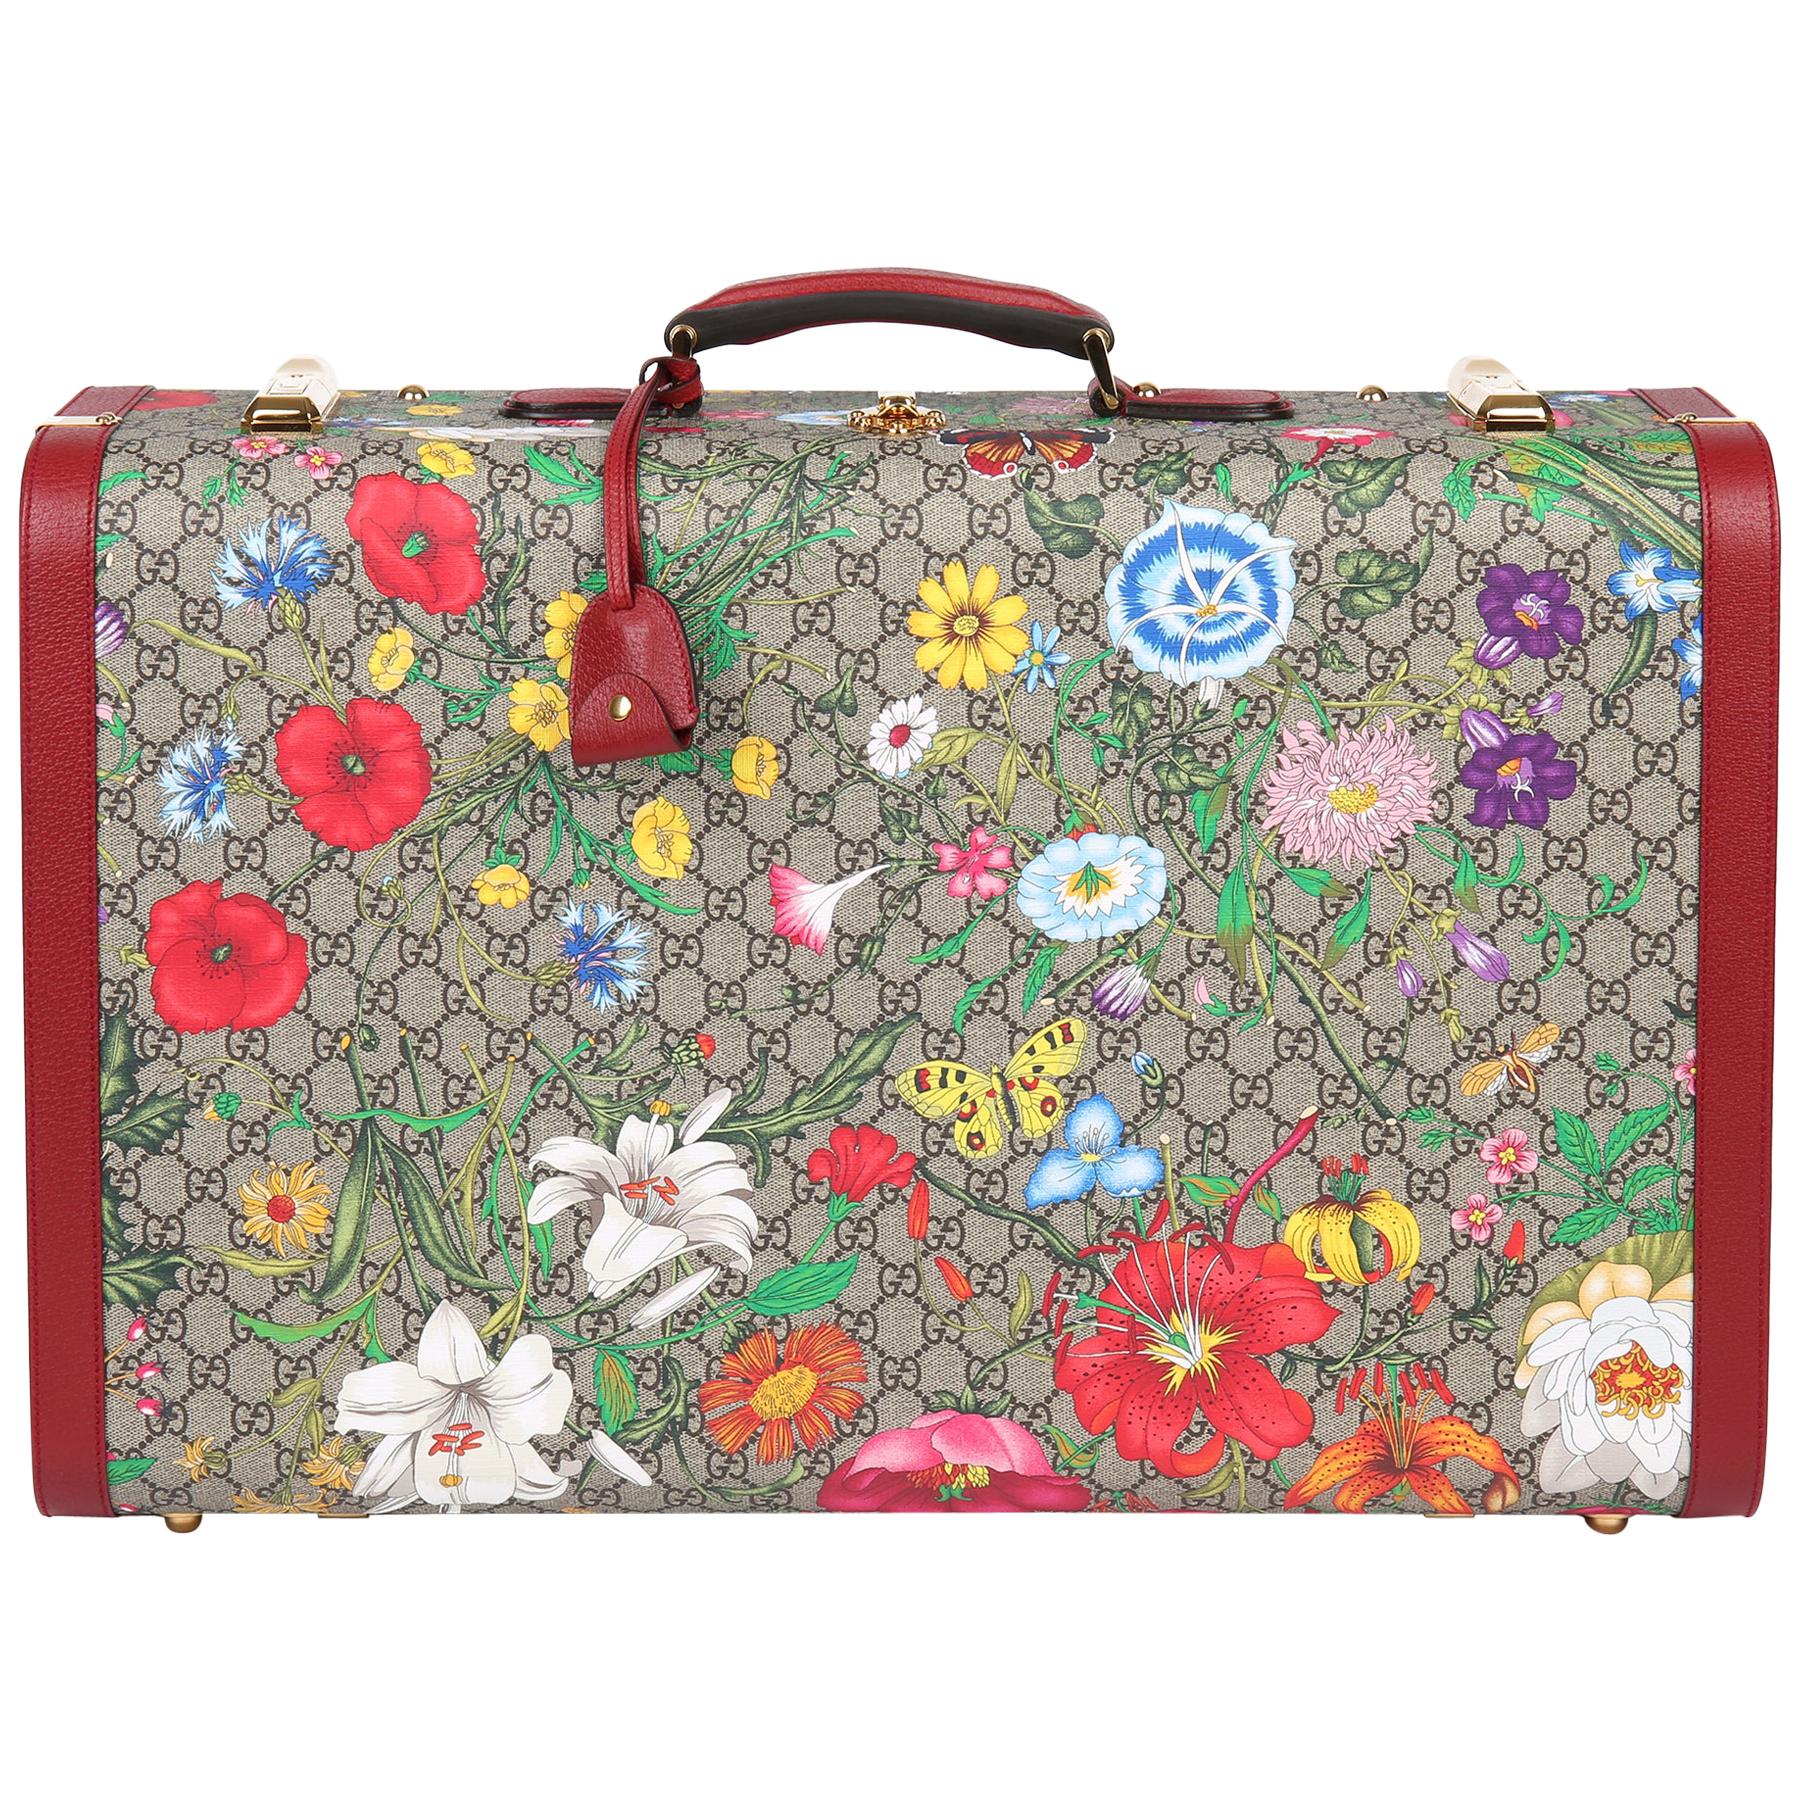 2021 Gucci GG Flora Coated Canvas & Red Pigskin Leather Large Suitcase Trunk  